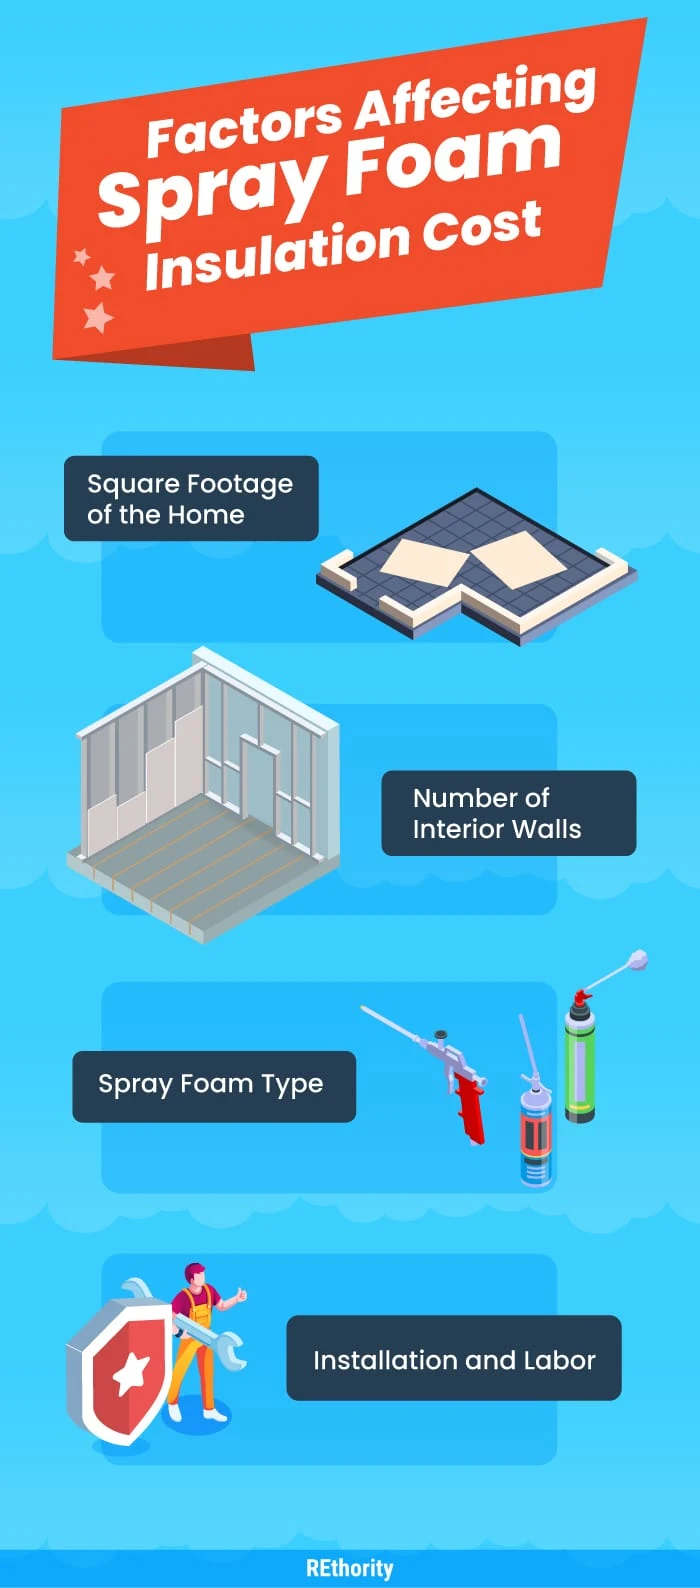 Spray form insulation cost graphic featuring factors that affect the cost